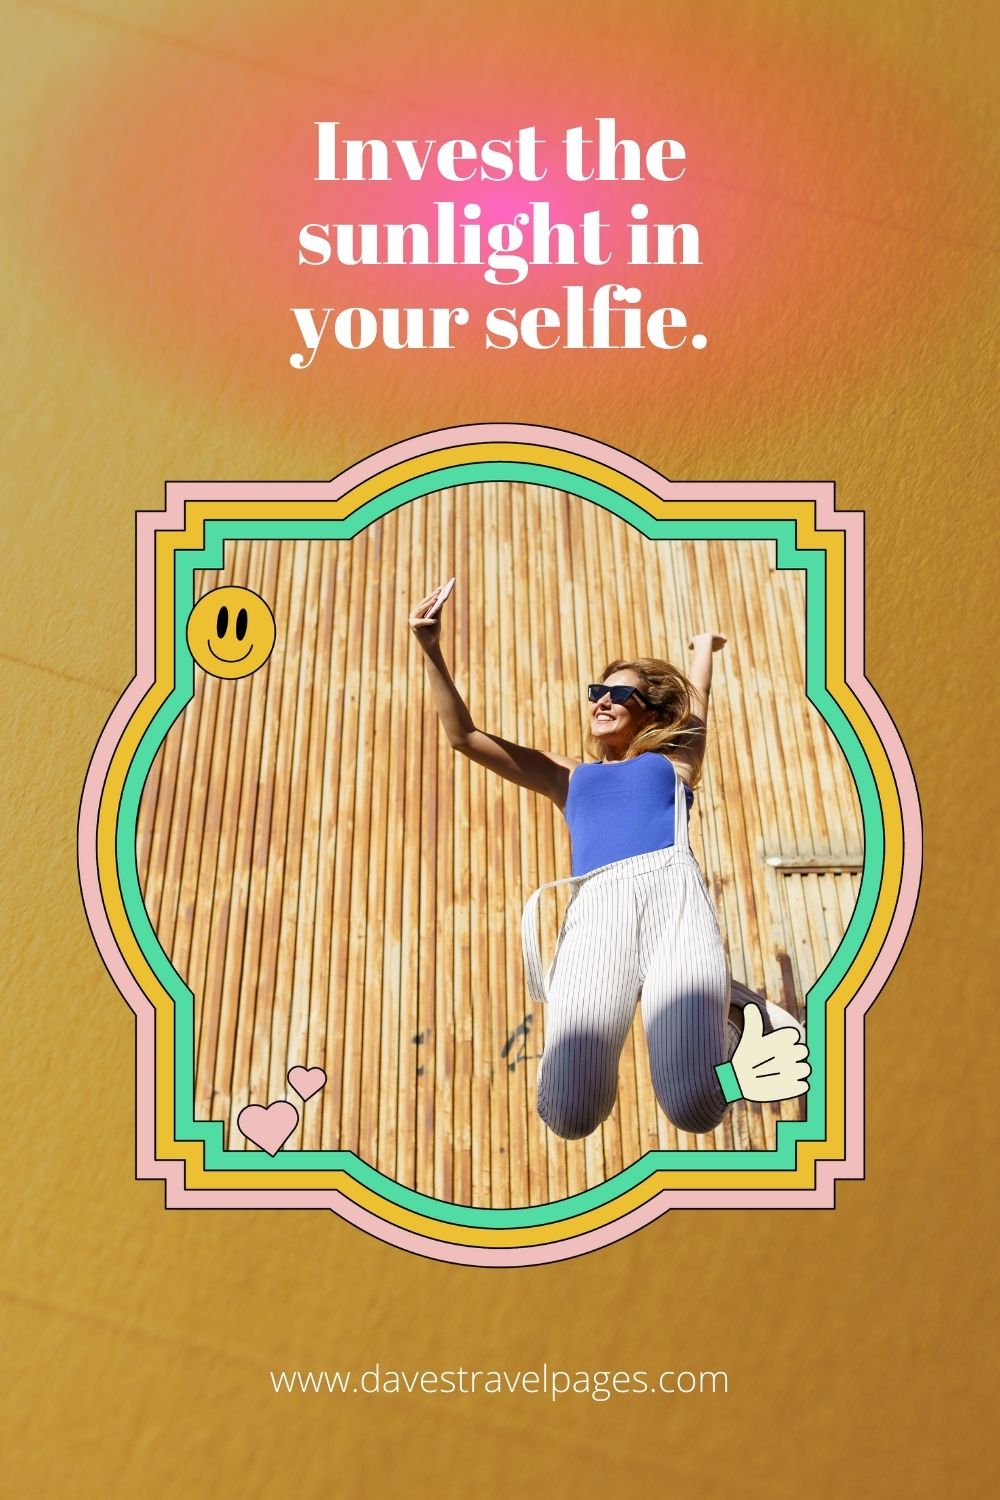 Invest the sunlight in your selfie.